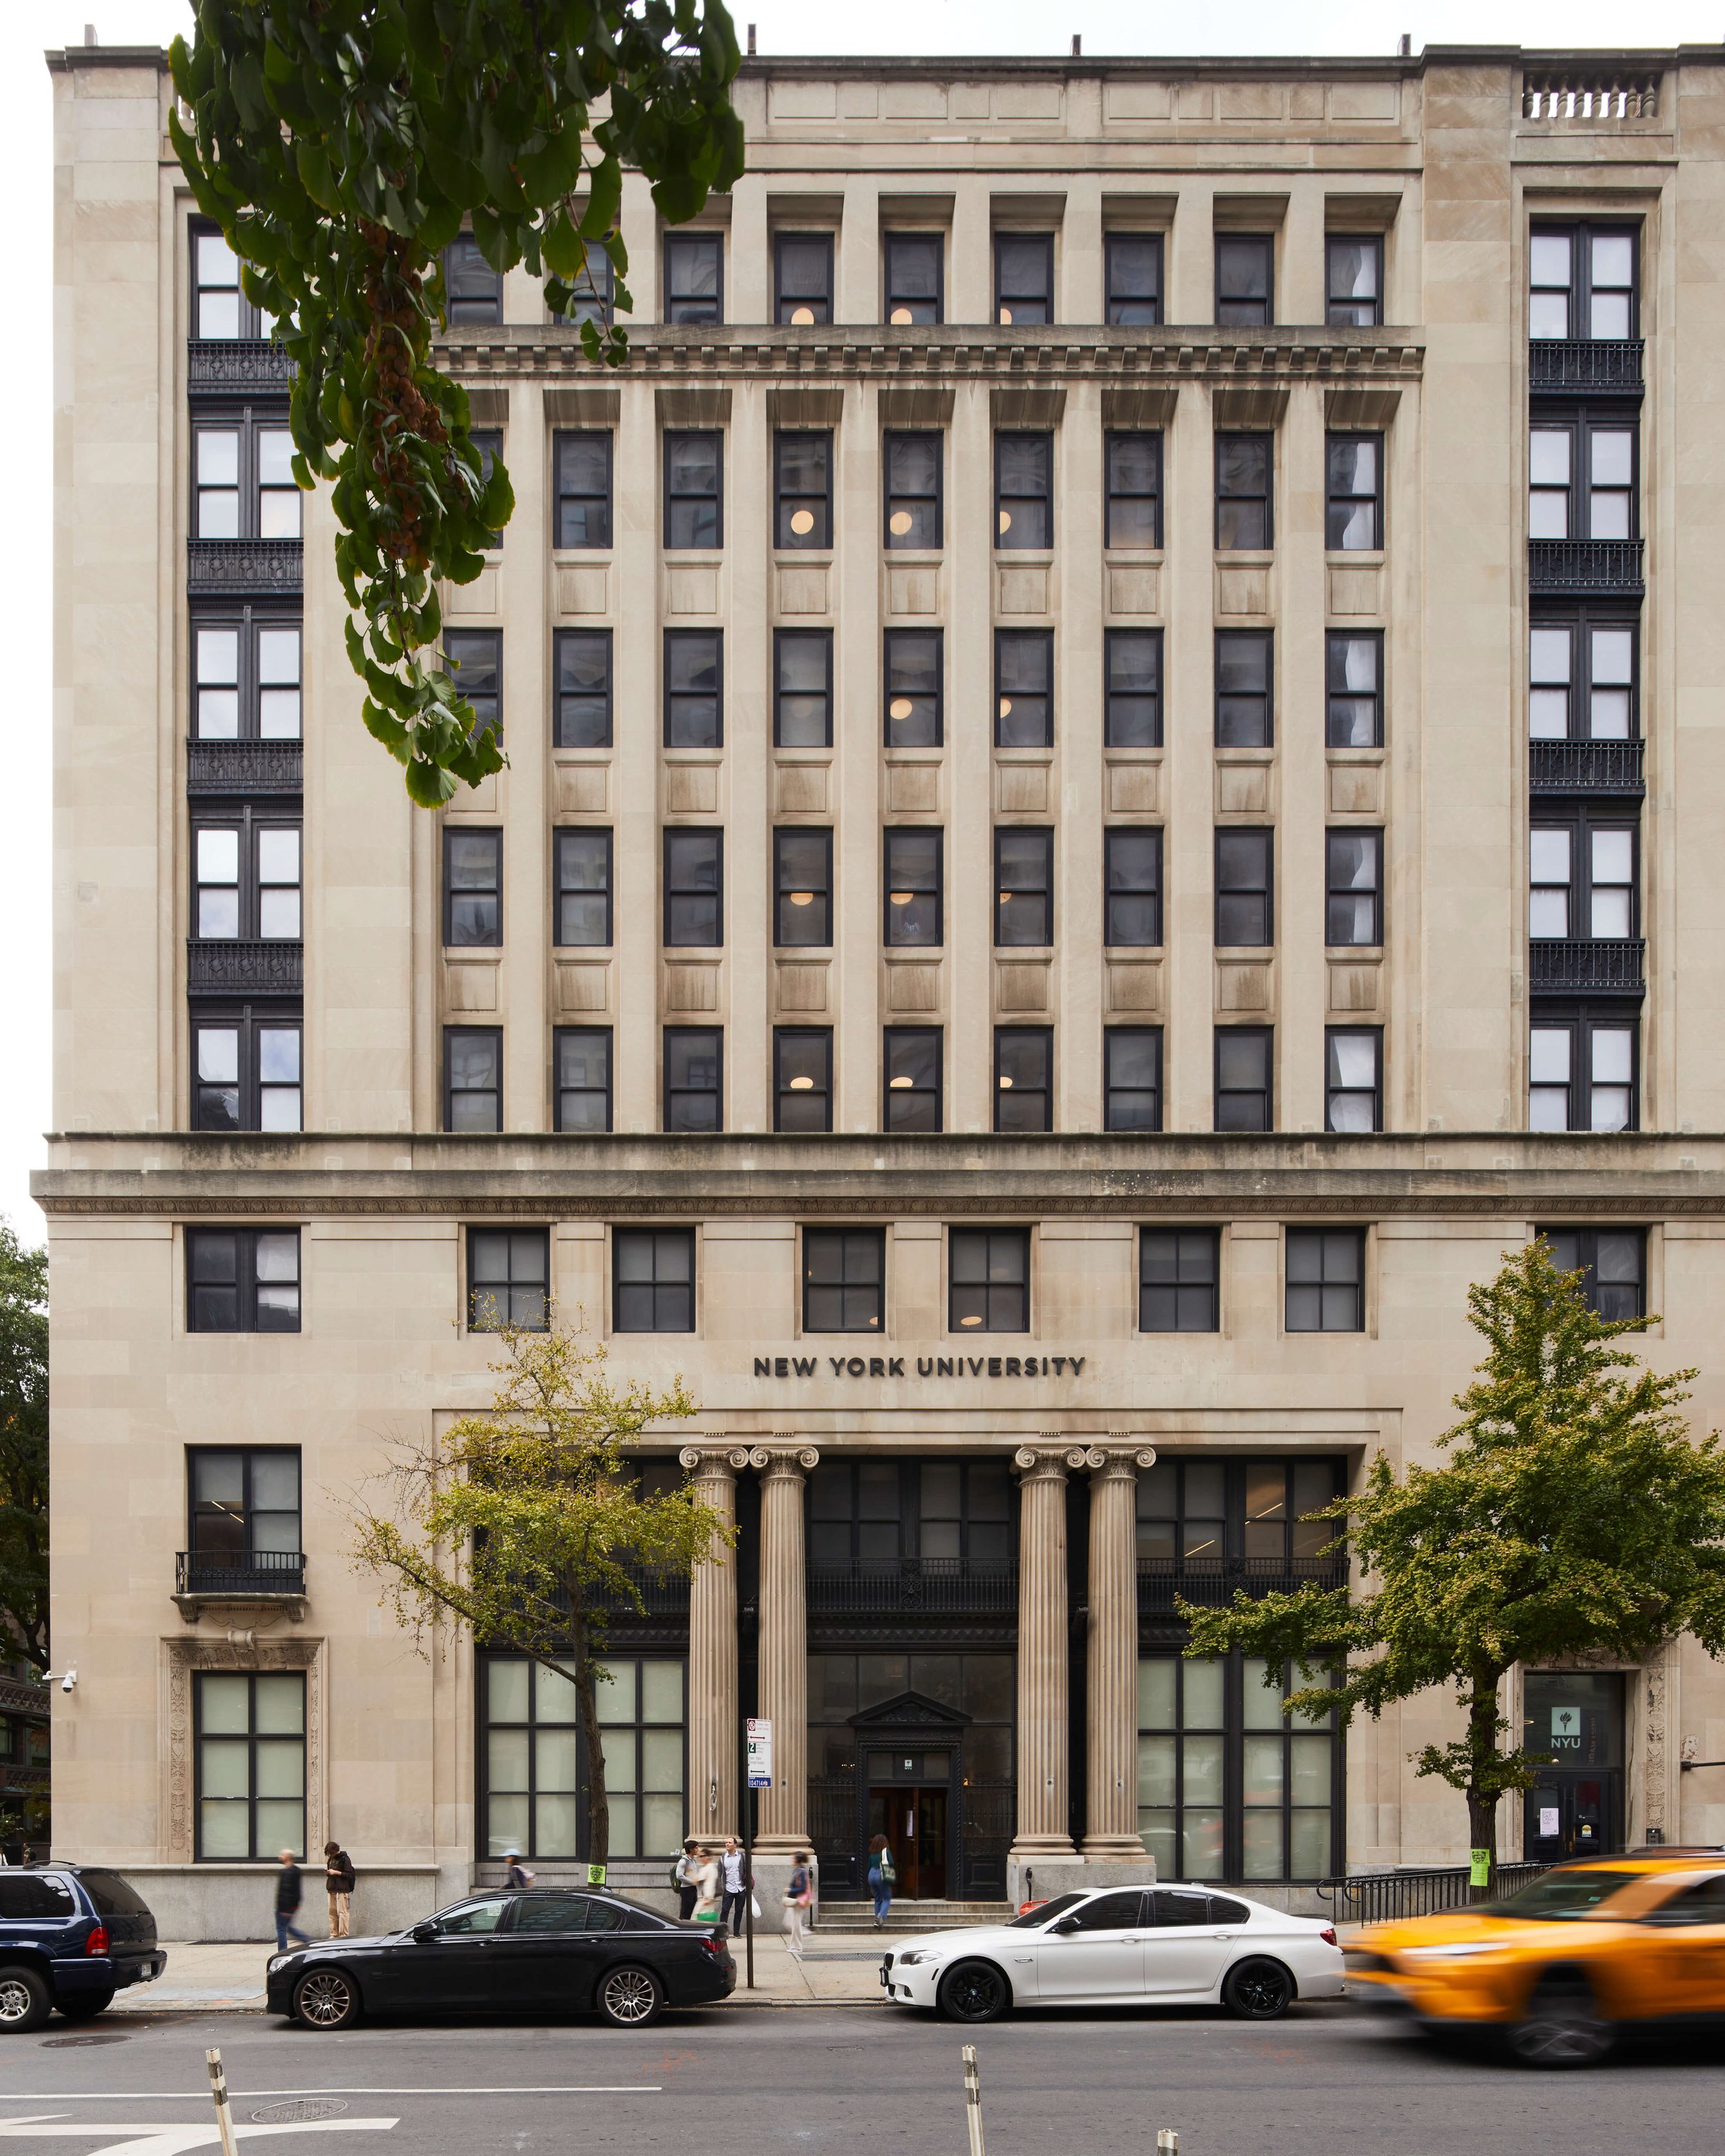  60-62 Fifth Avenue. This 8-story National Registers of Historic Places-listed building was constructed as the headquarters of the prominent publishers Macmillan Co. in 1923-24 by the preeminent architectural firms of Carrere &amp; Hastings and Shrev